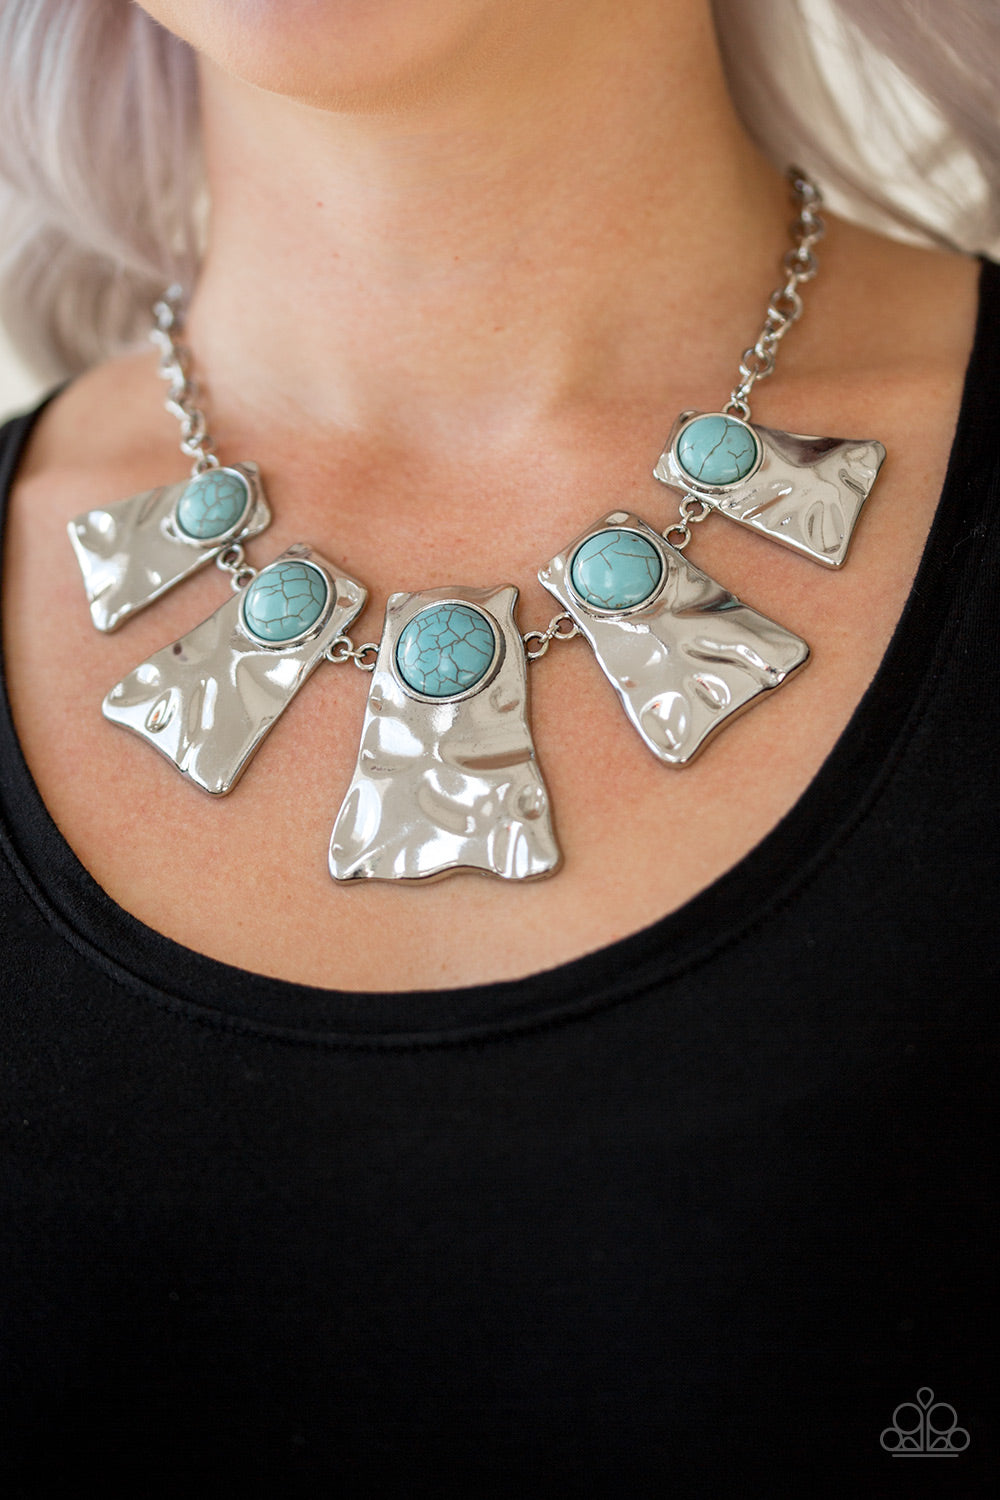 Cougar Blue Turquoise Necklace